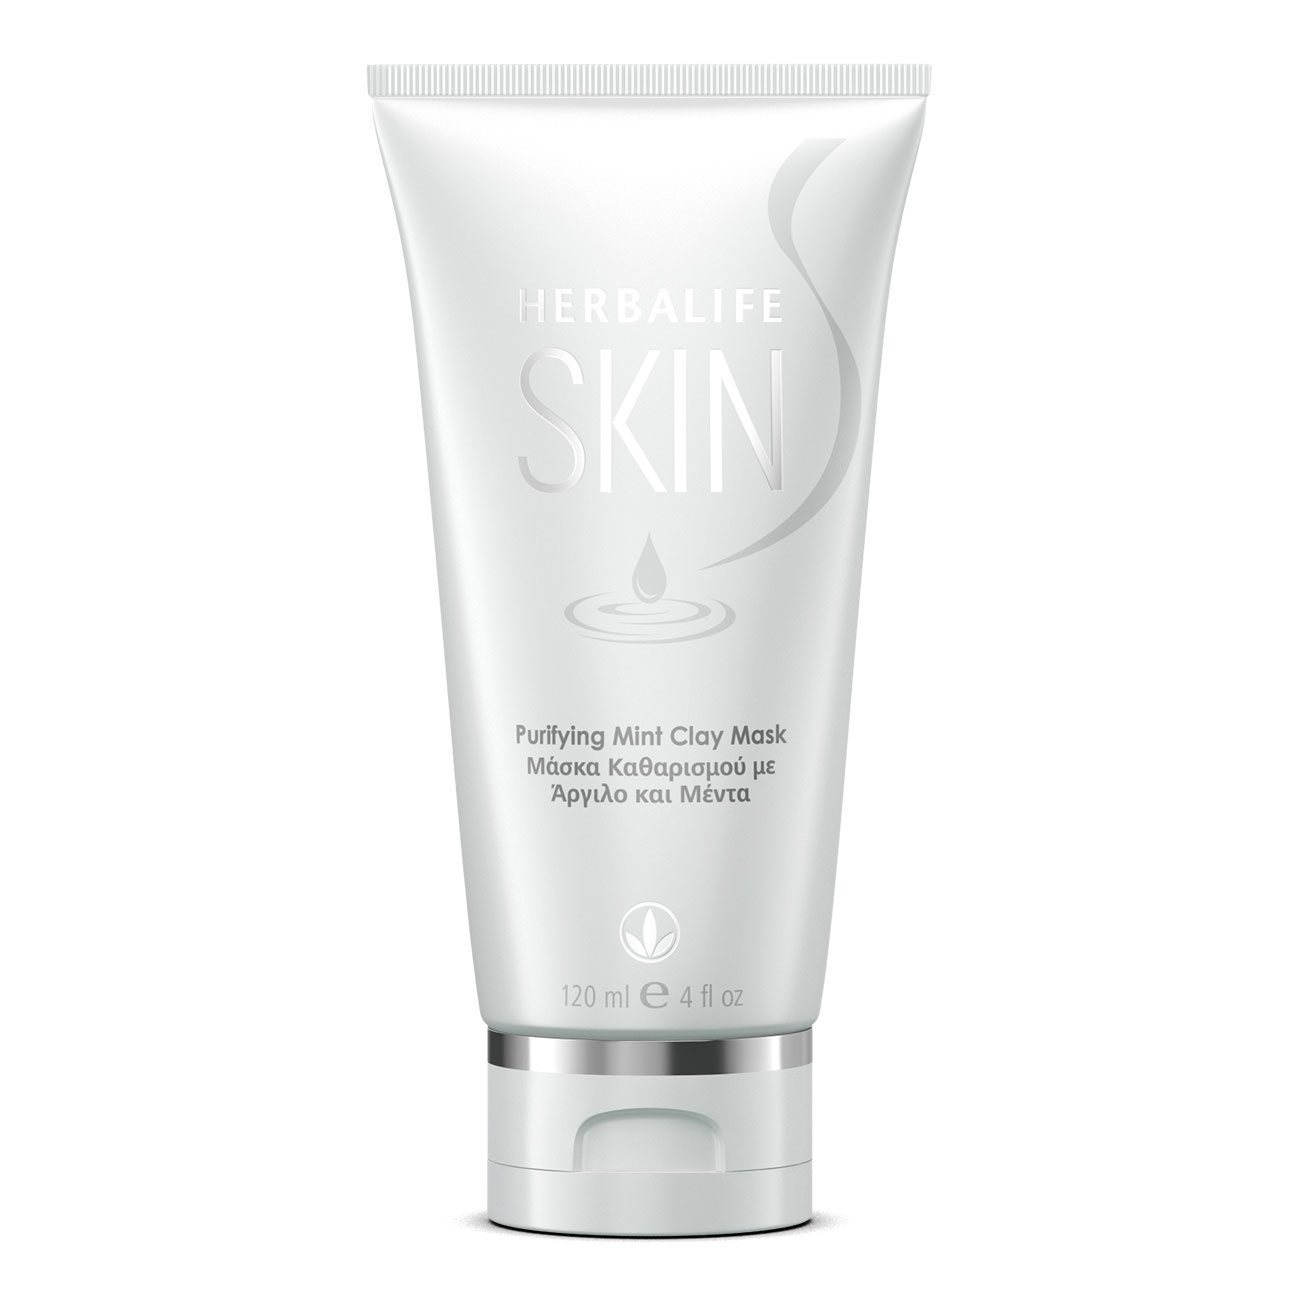 Herbalife SKIN Purifying Mint Clay Mask  product